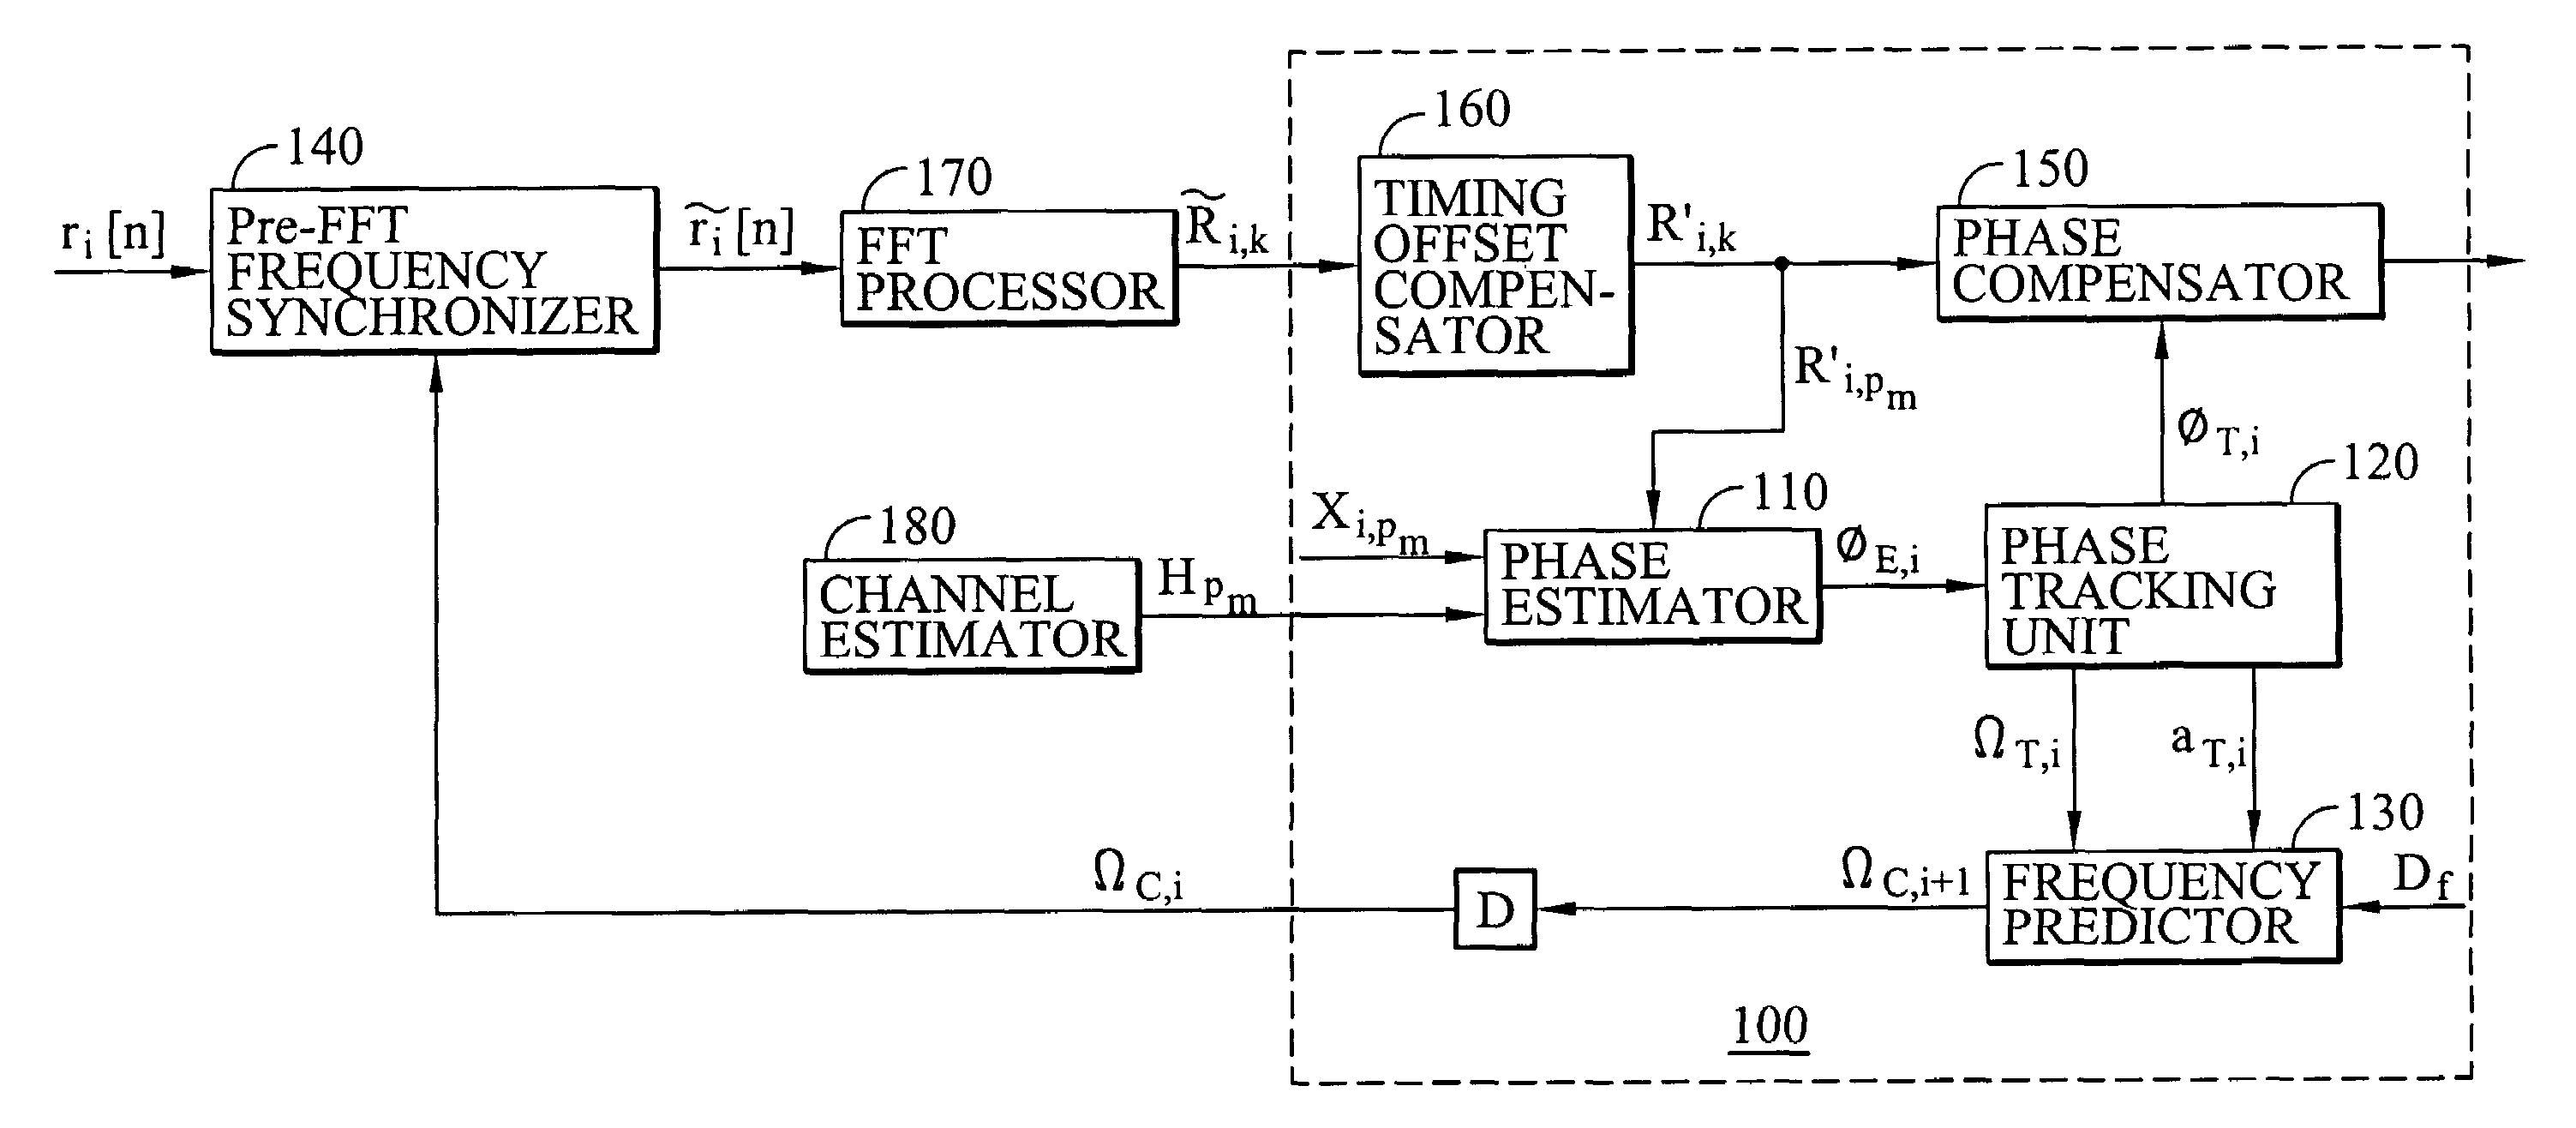 Phase and frequency drift compensation in Orthogonal Frequency Division Multiplexing systems